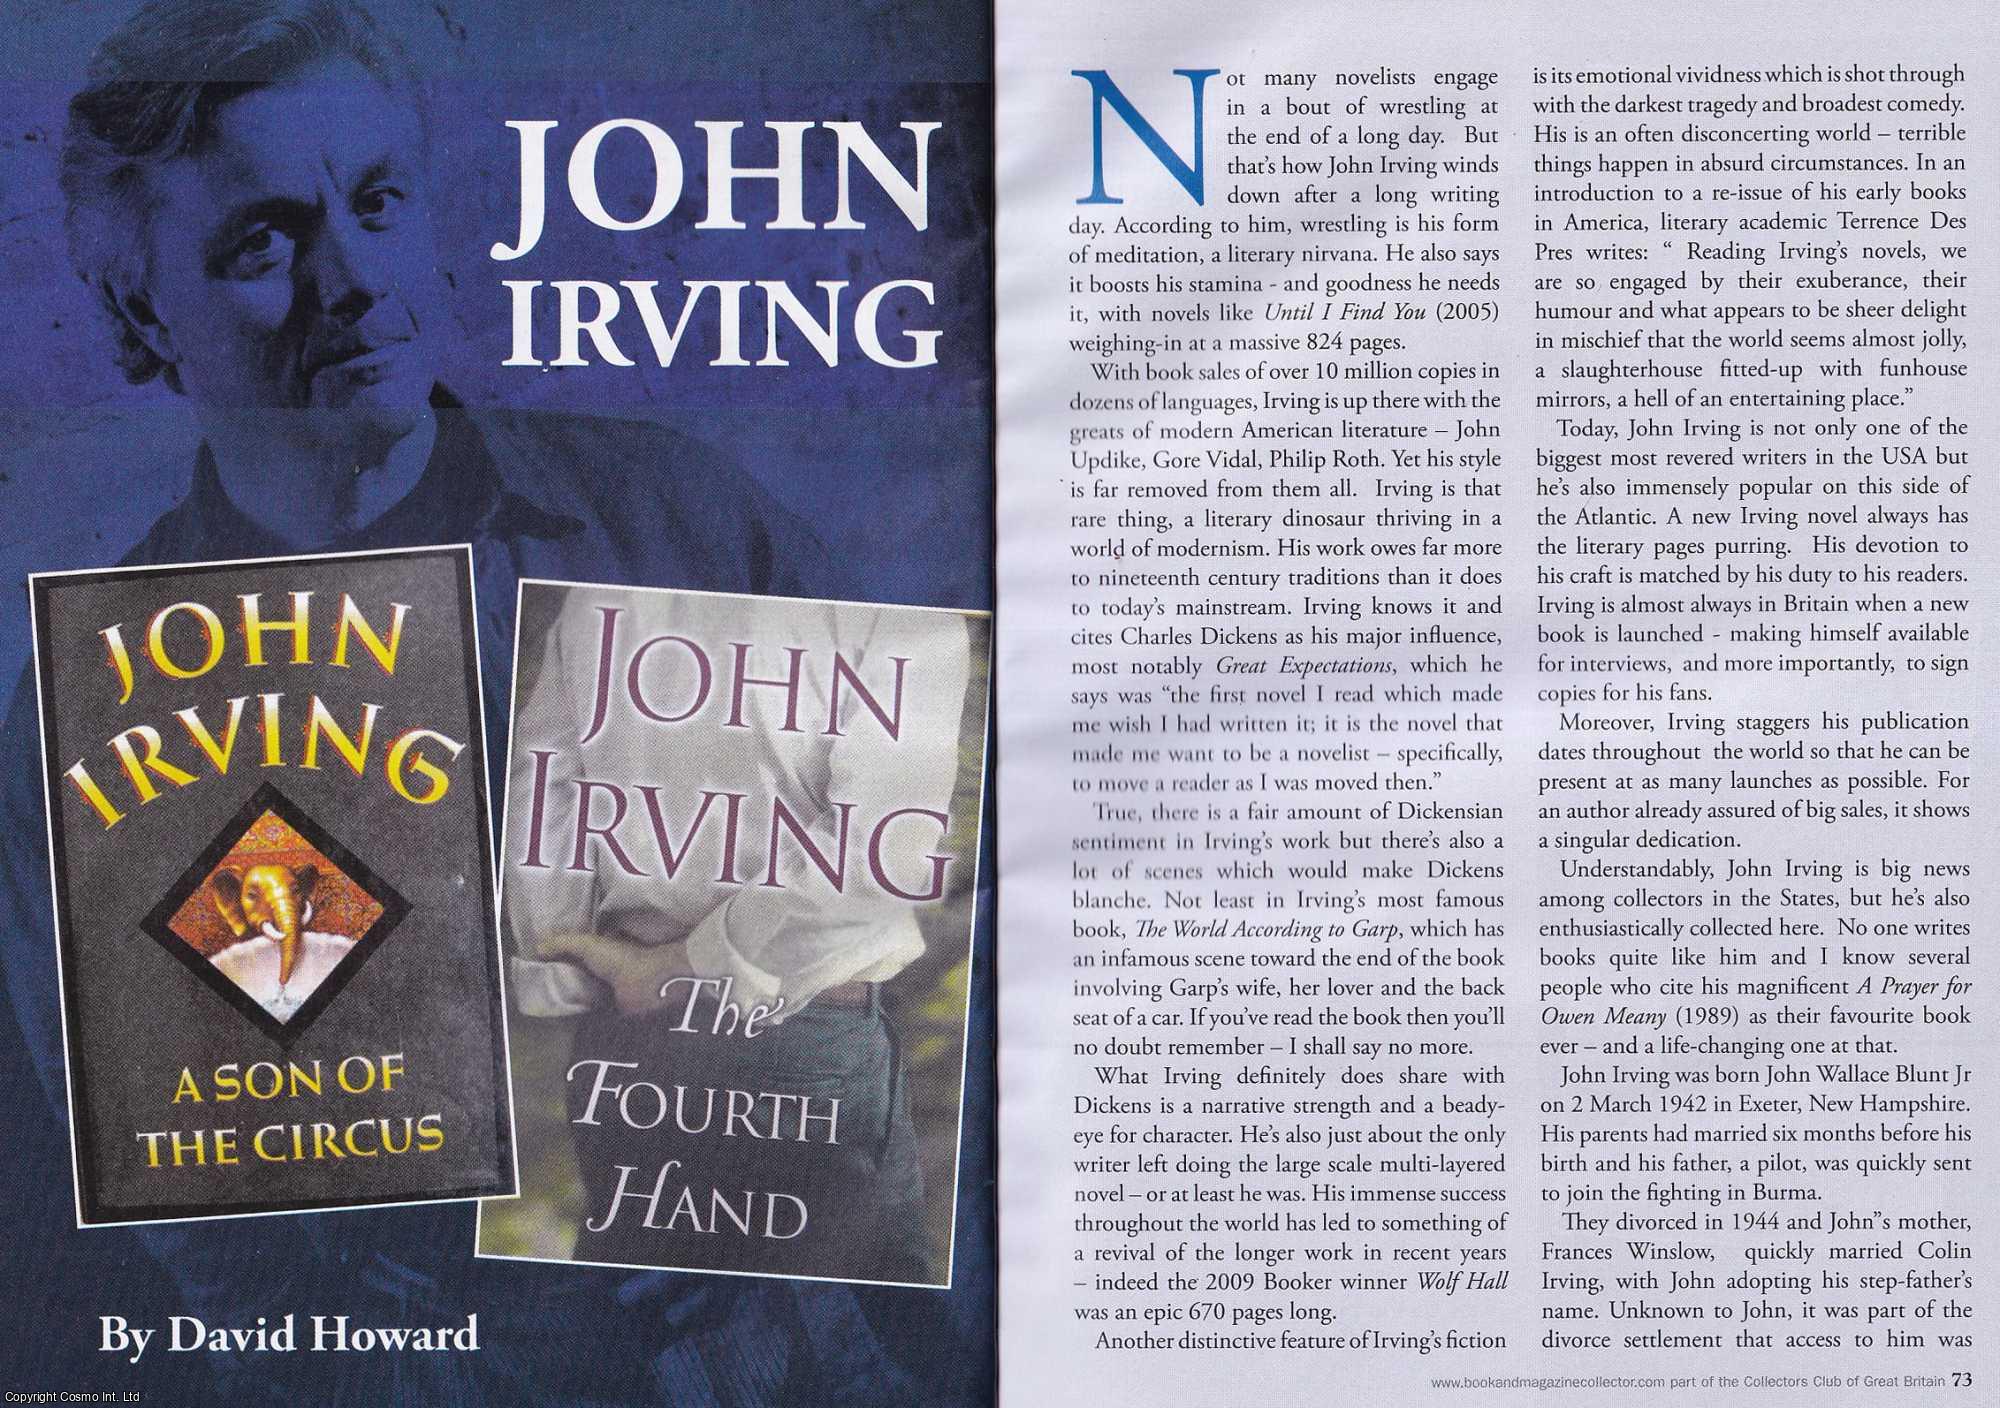 David Howard - John Irving, novelist. This is an original article separated from an issue of The Book & Magazine Collector publication, 2010.